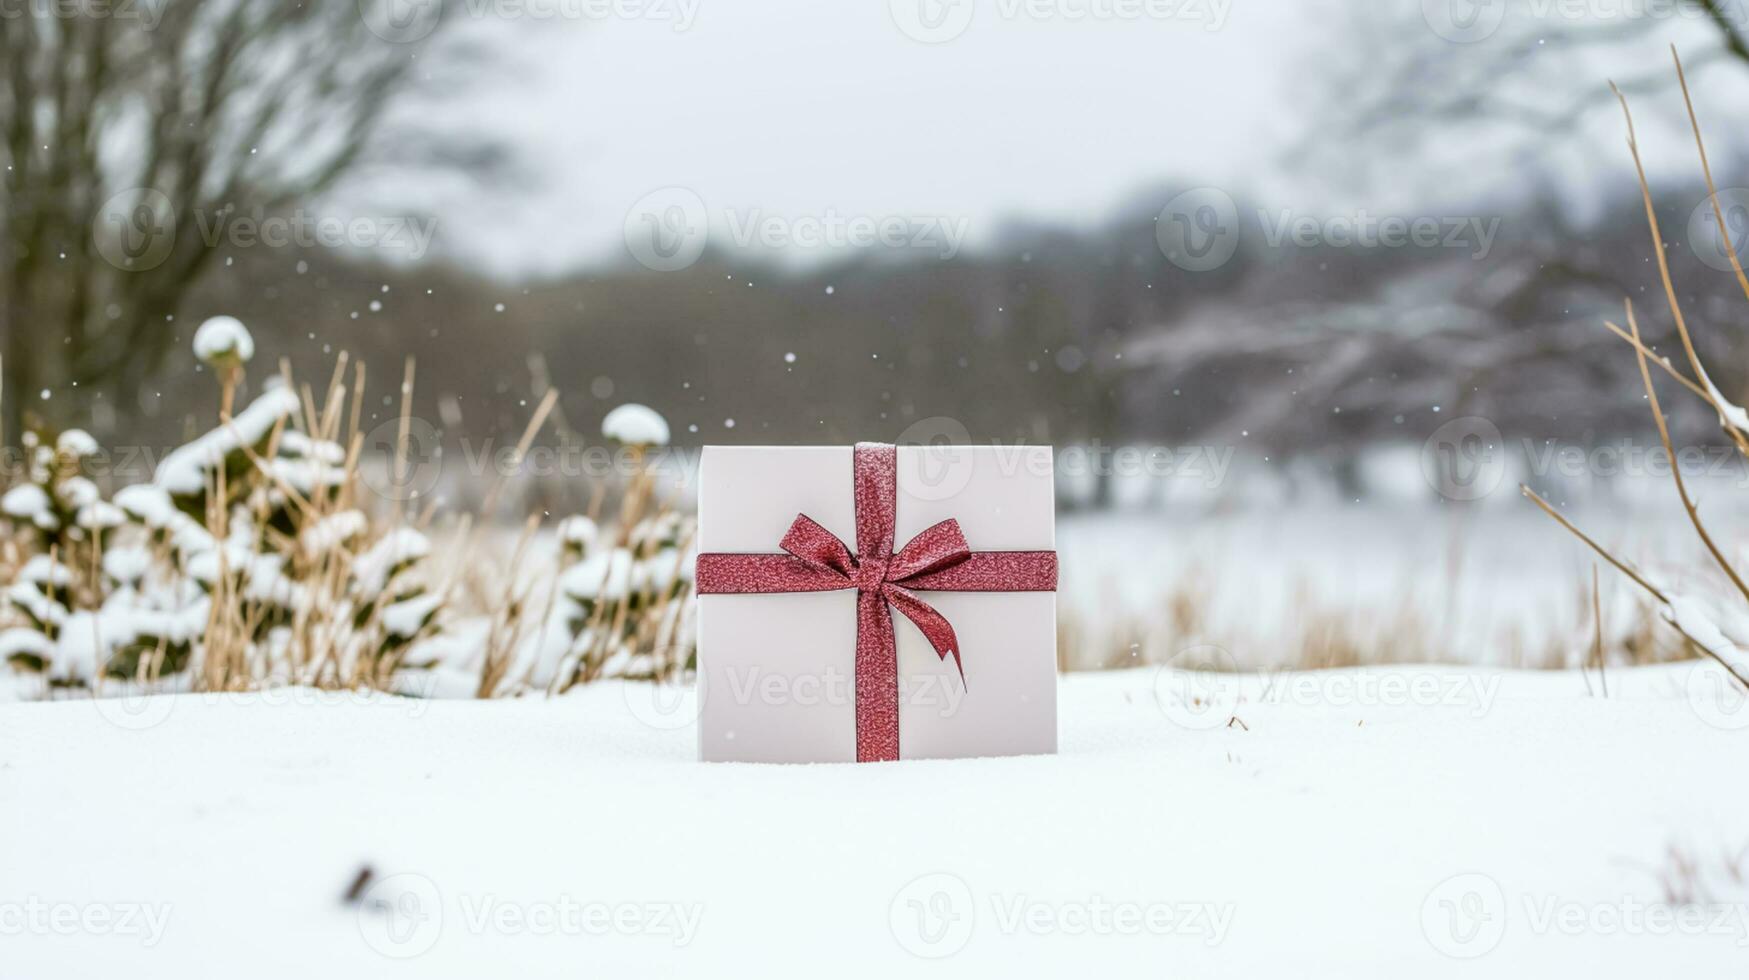 Christmas holiday gift and present, gift box in the snow in snowfall winter countryside nature for boxing day, holidays shopping sale photo